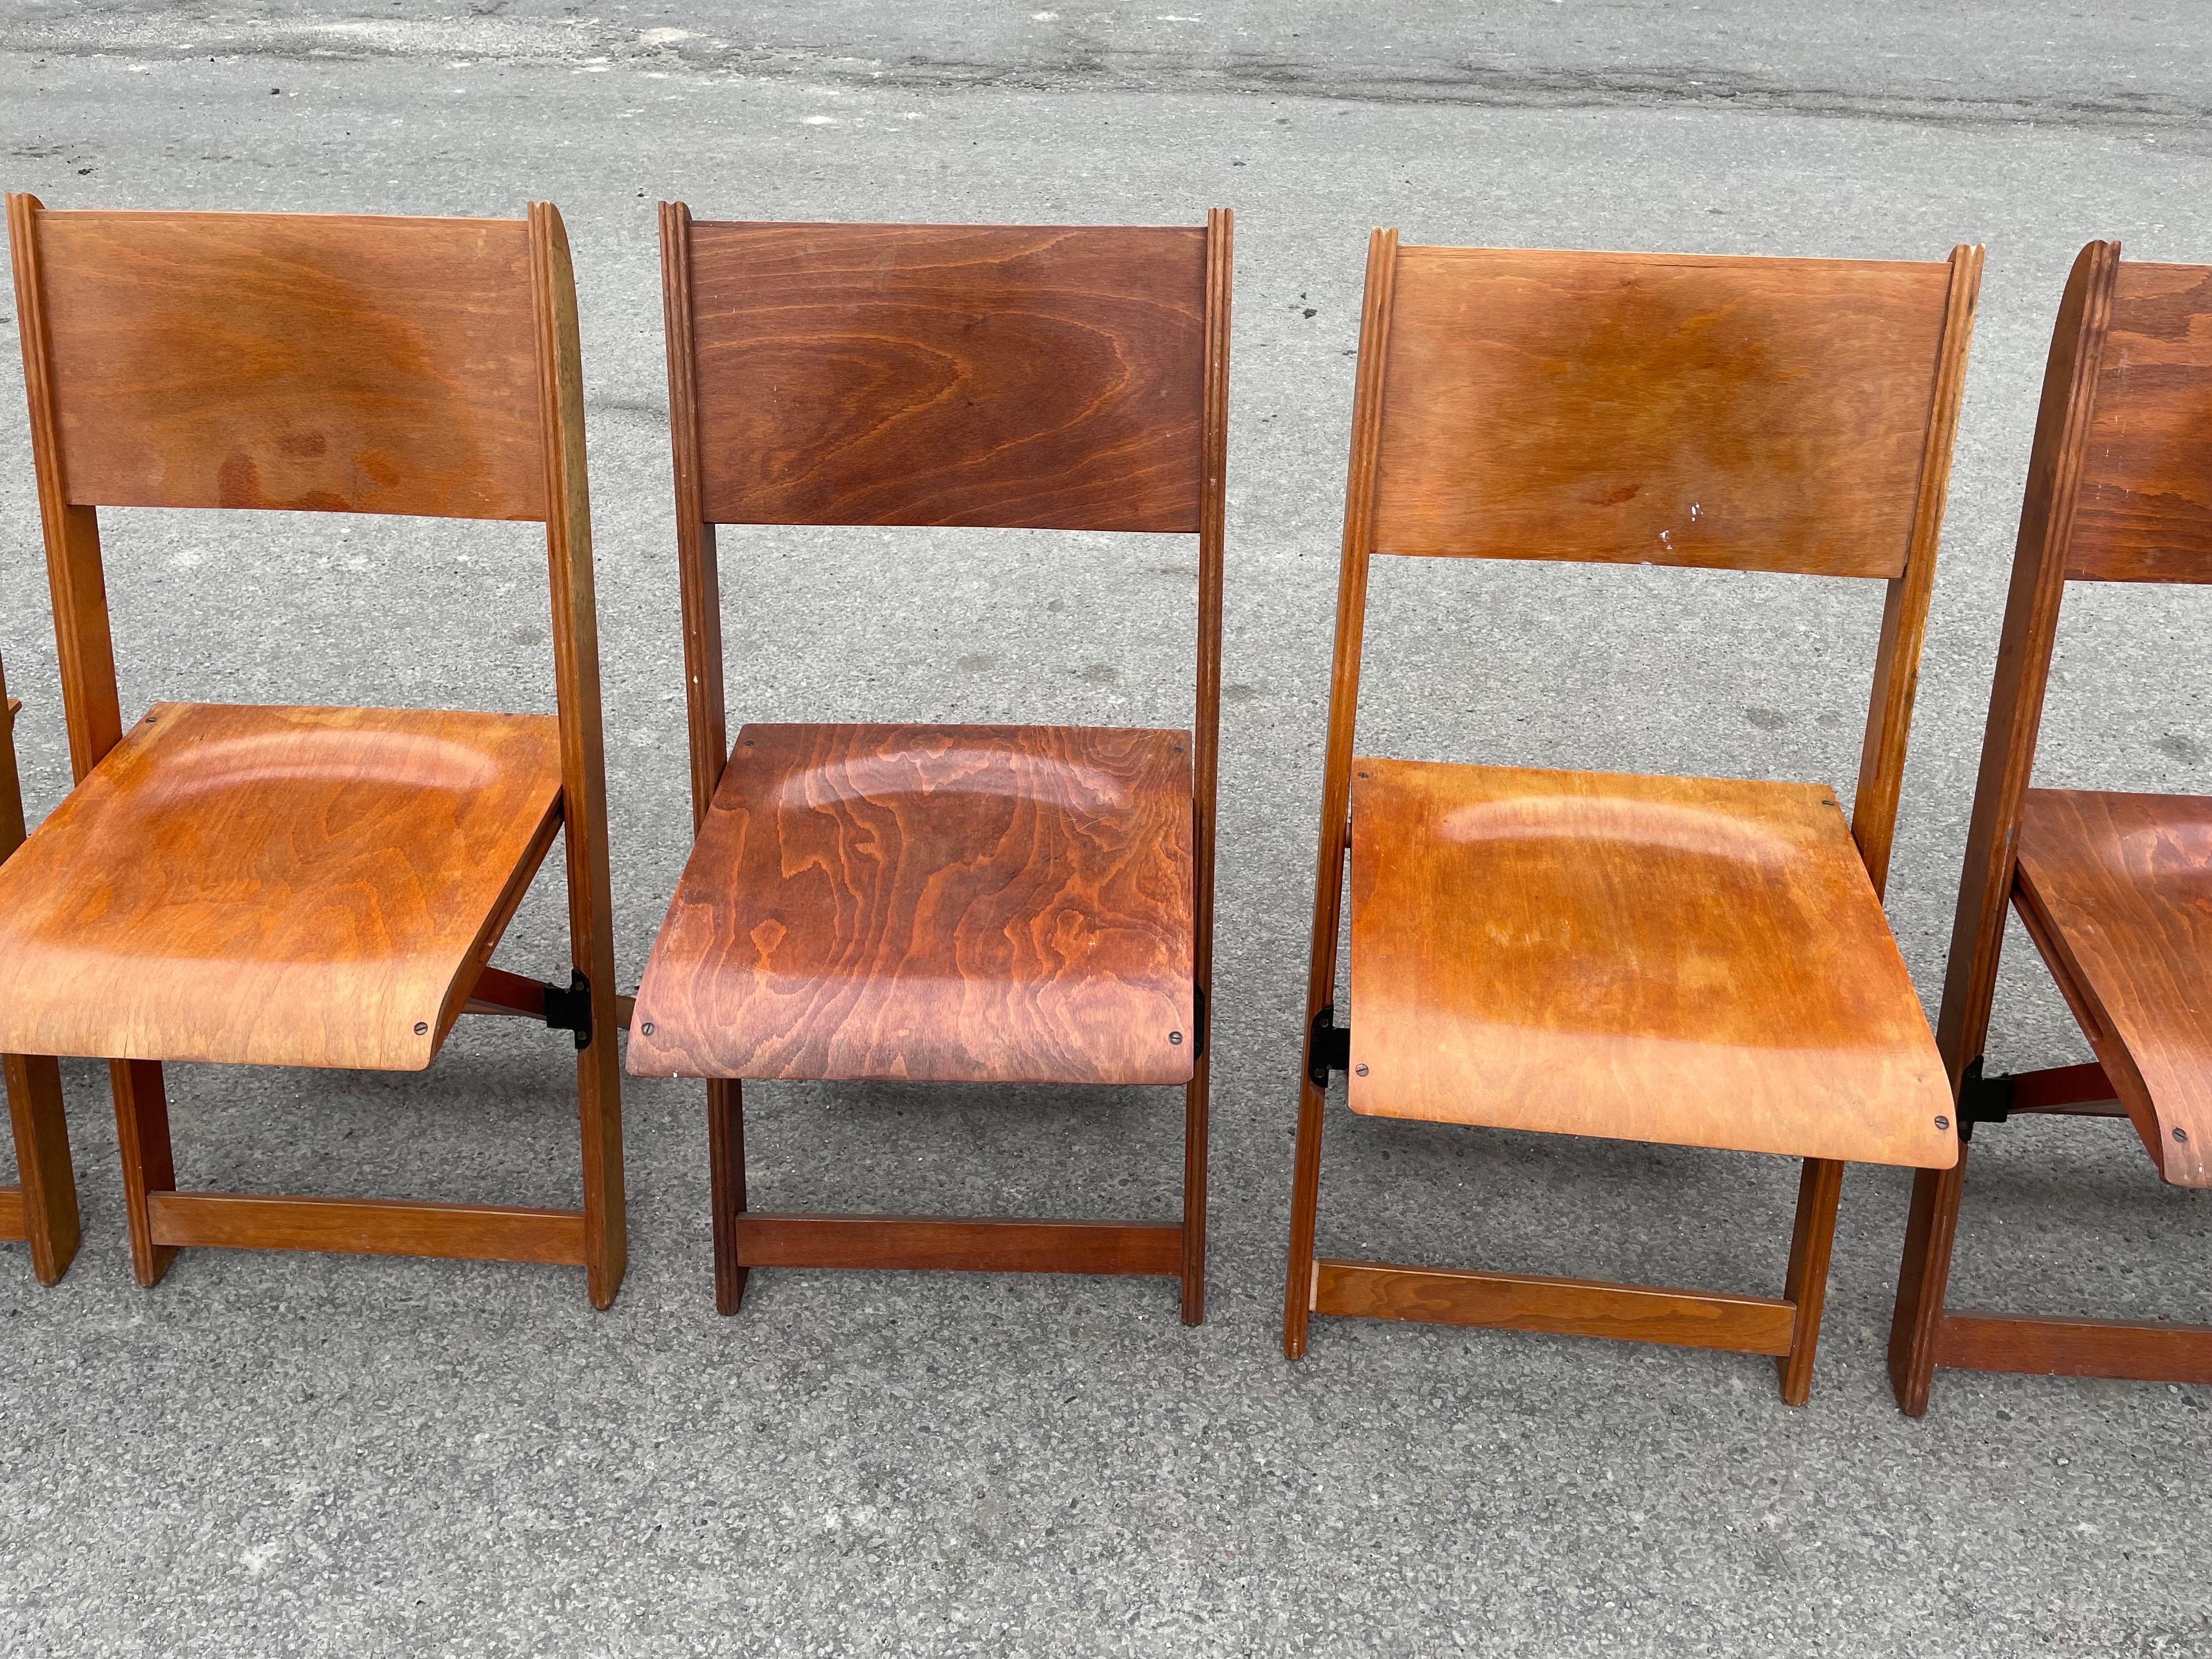 Birch Foldable Danish Chairs from 1930’s